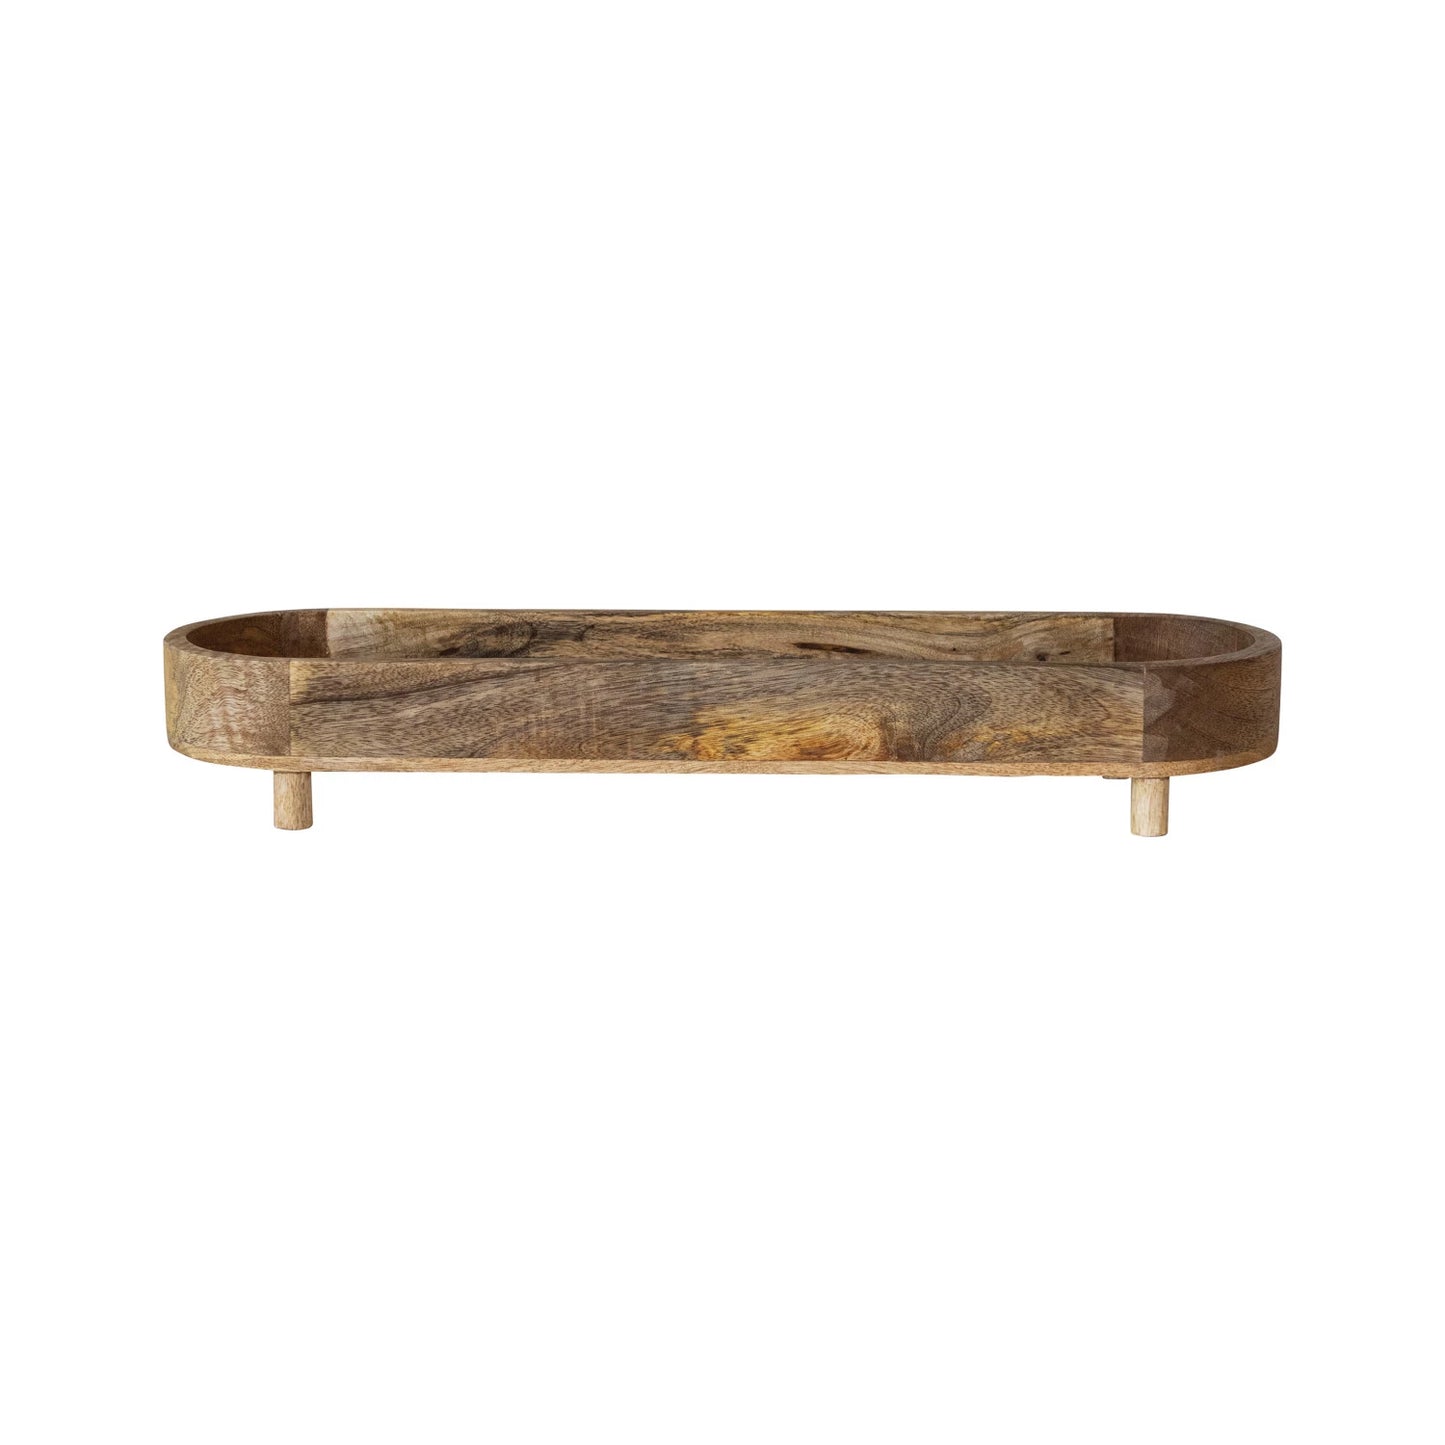 Mango Wood Footed Tray, The Feathered Farmhouse